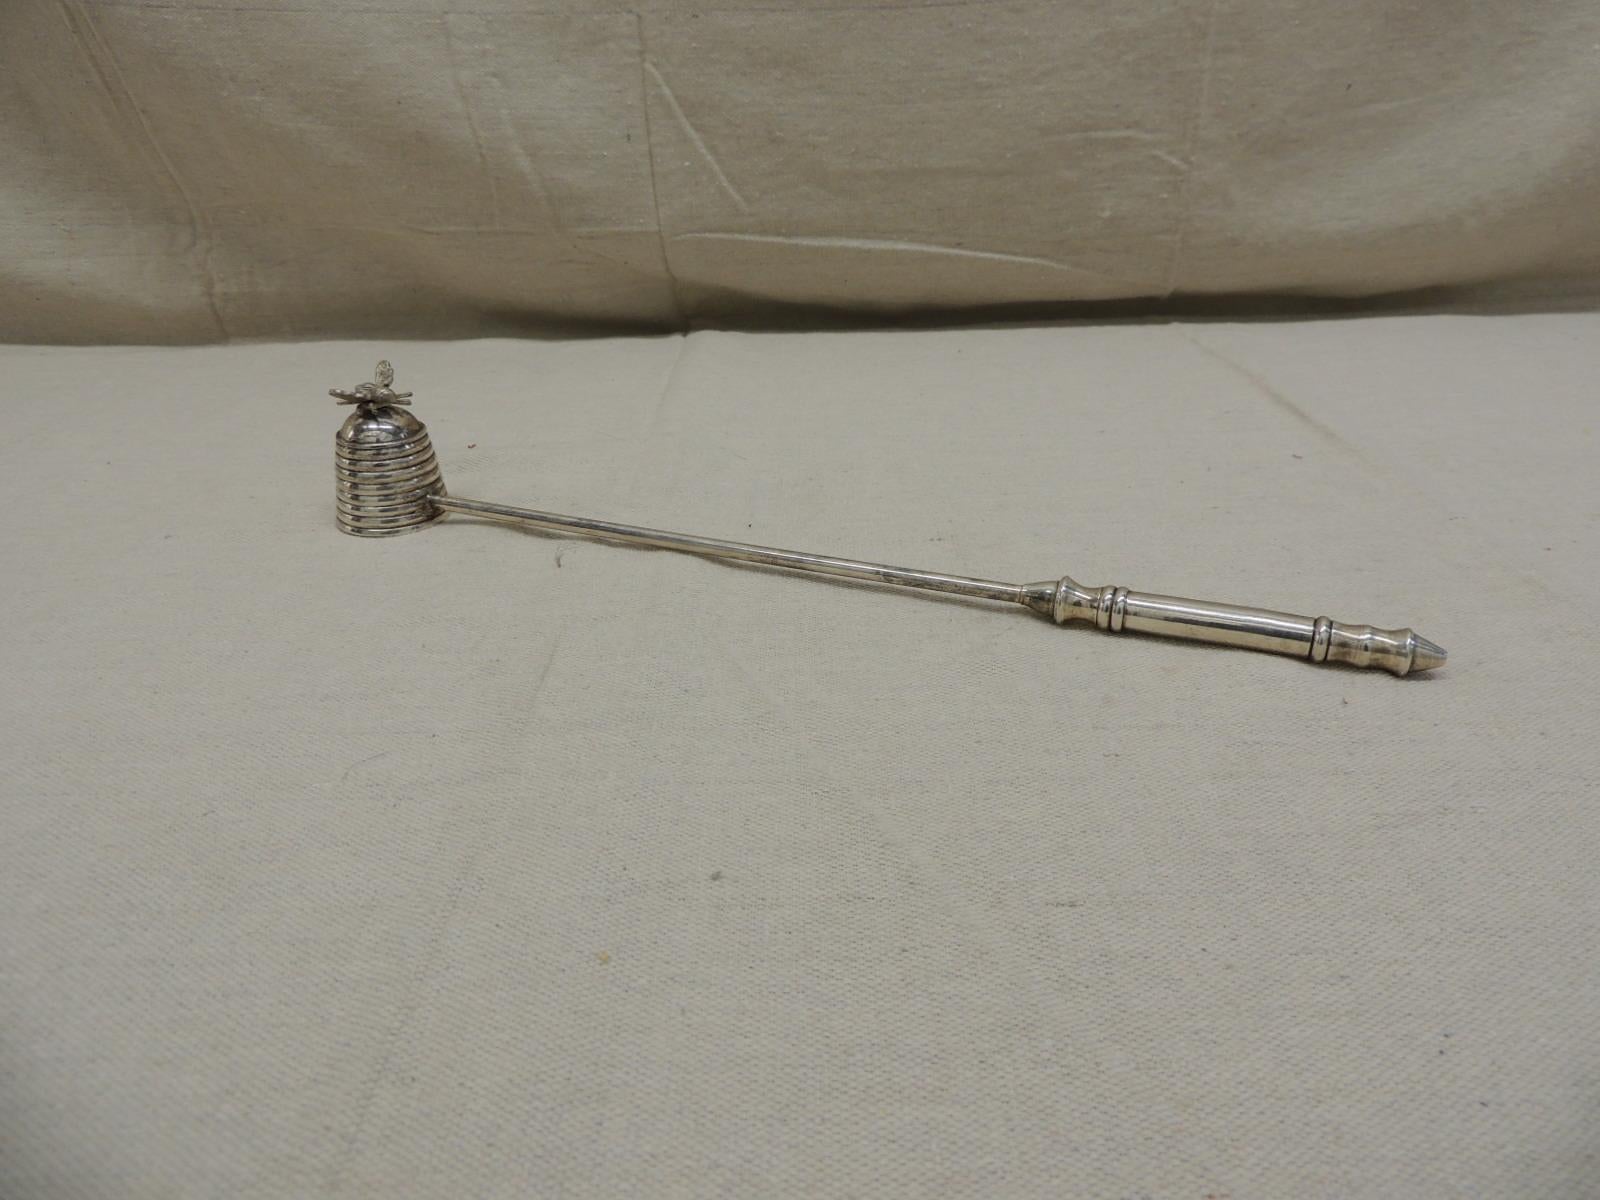 Large chrome candle snuffer
with a bee and beehive style cup
Size: 